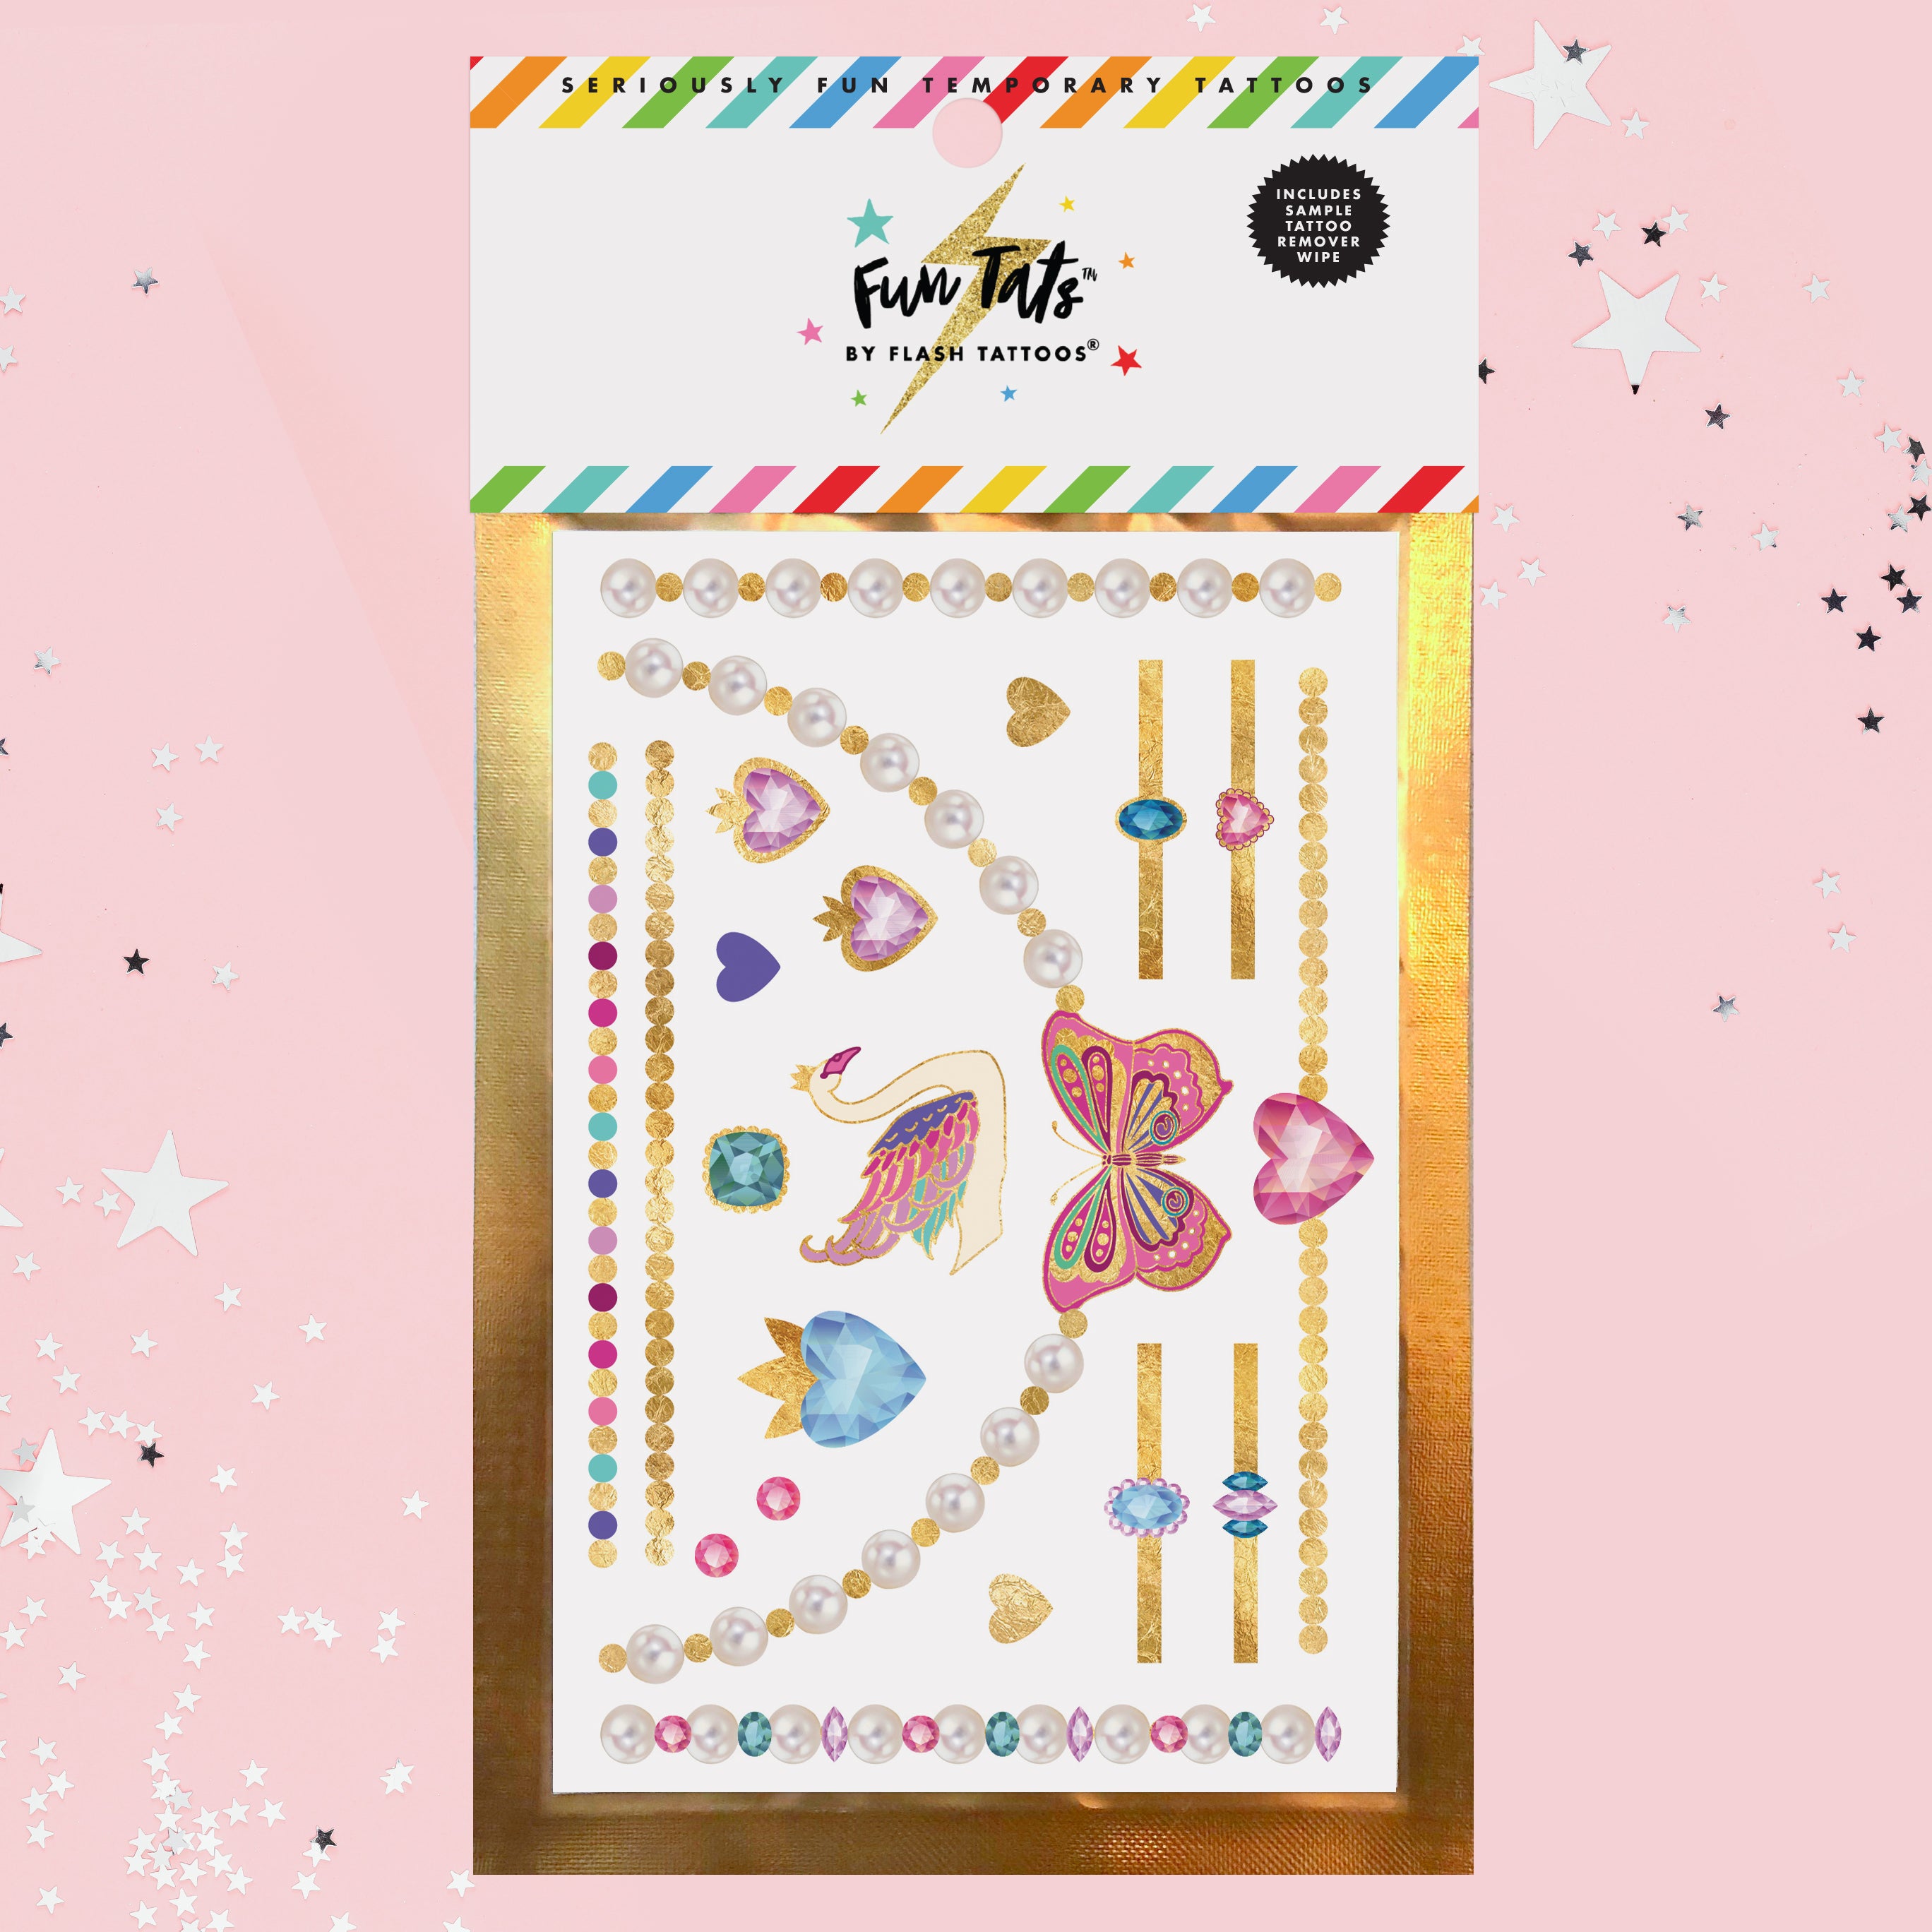 Princess Jewelry pack - two 4” X 6” mini-sheets featuring over 32 different colorful designs in metallic gold foil and various pastel colors.